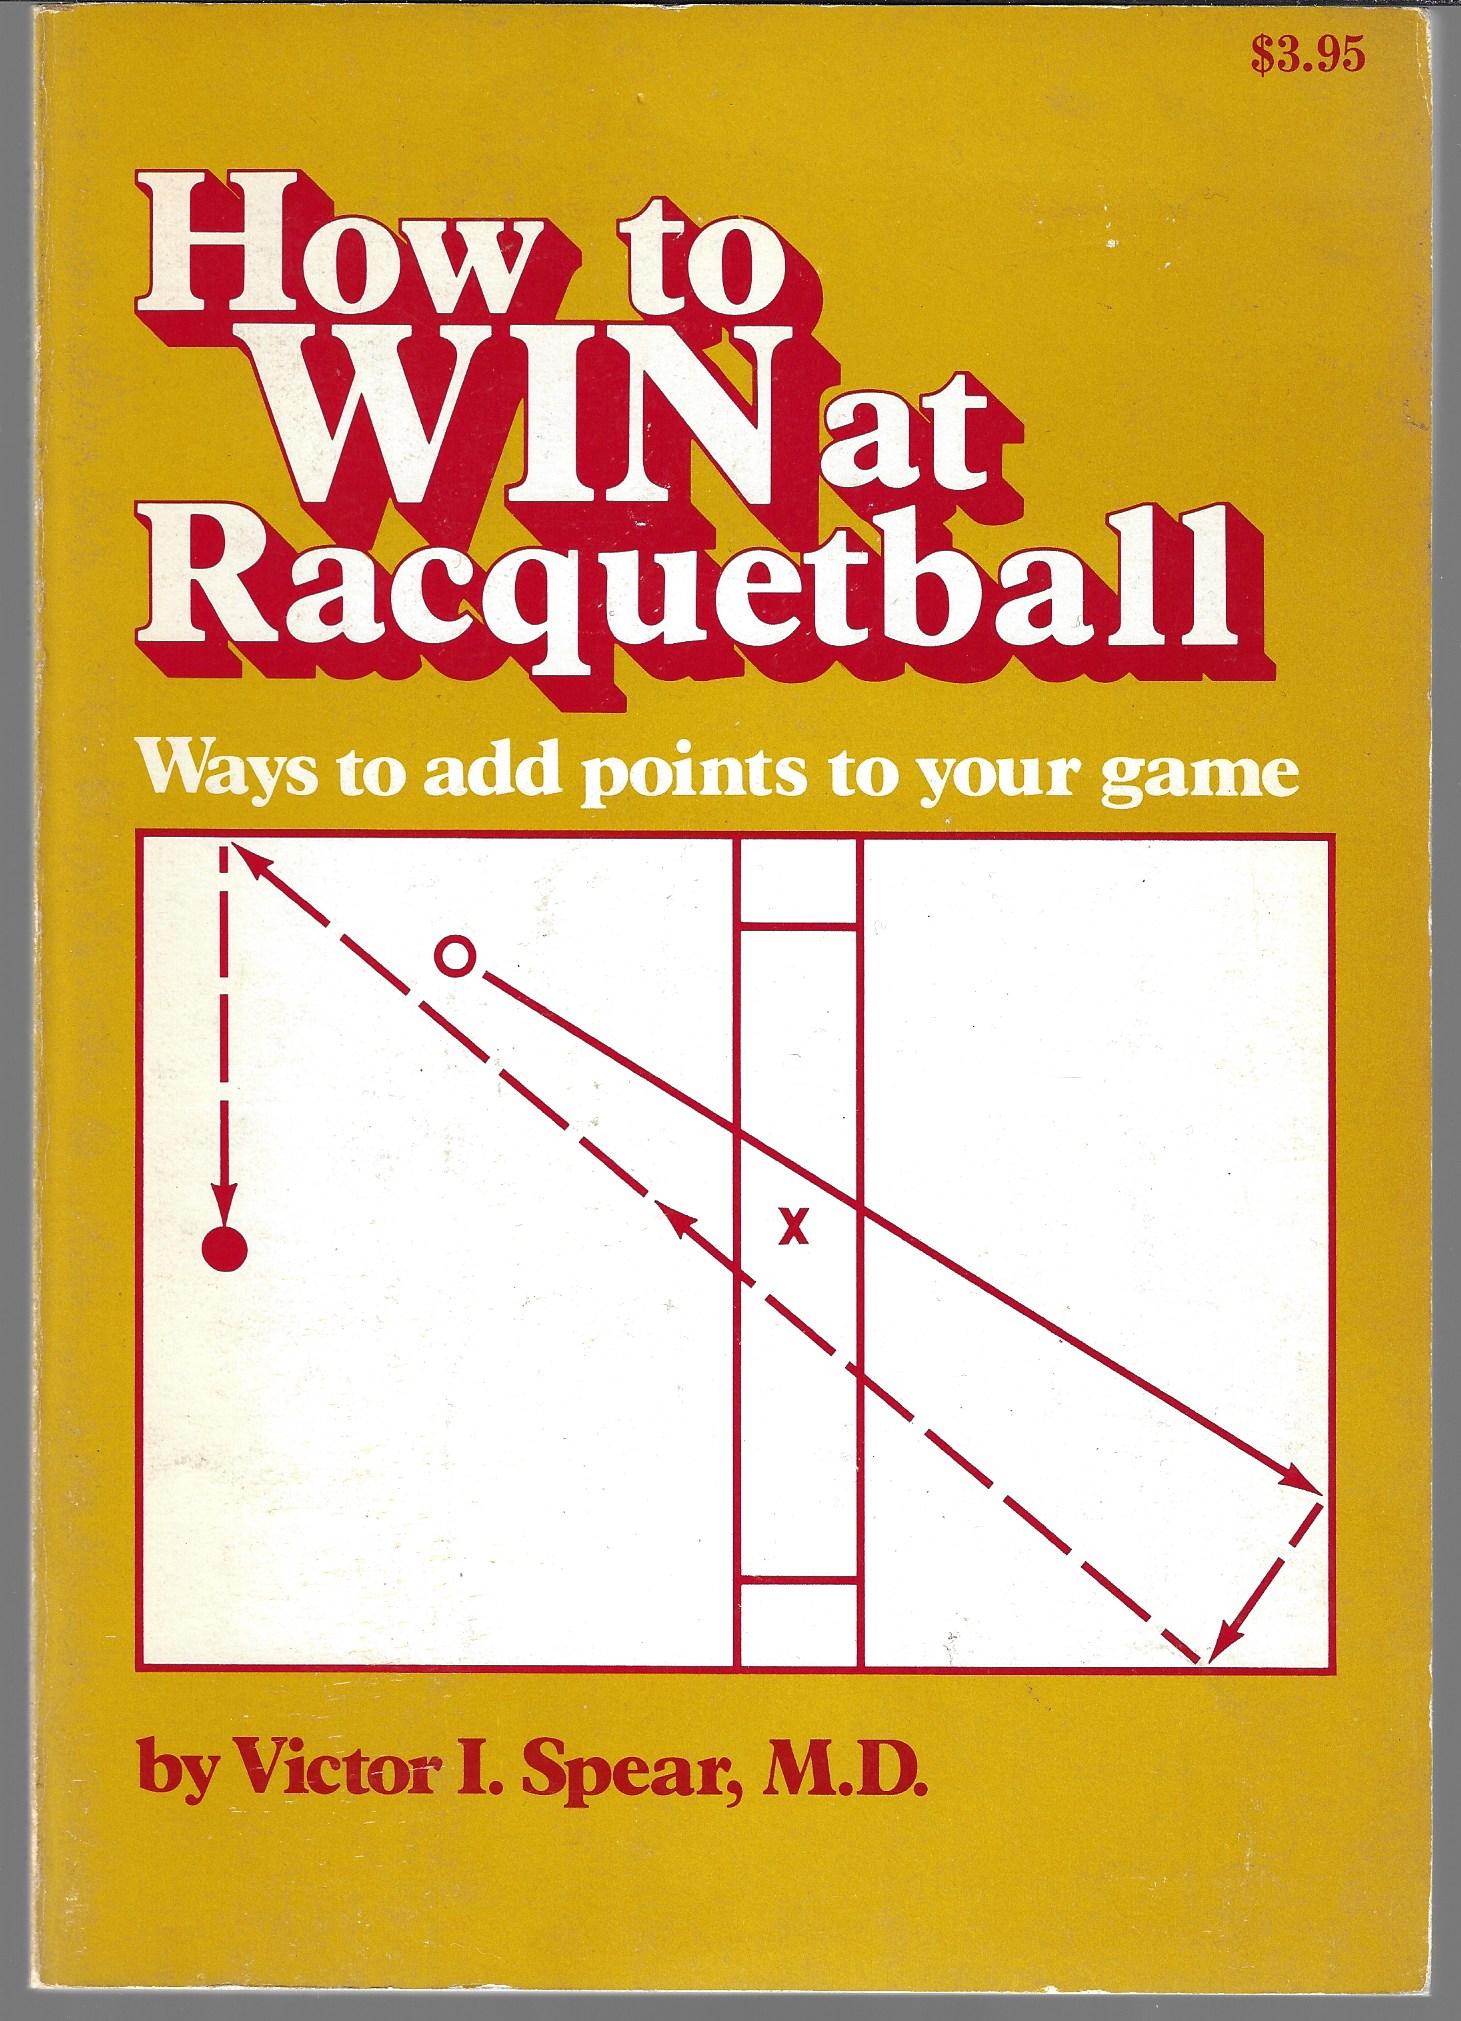 Spear, Victor I. - How to win at racquetball -Ways to add points to your game